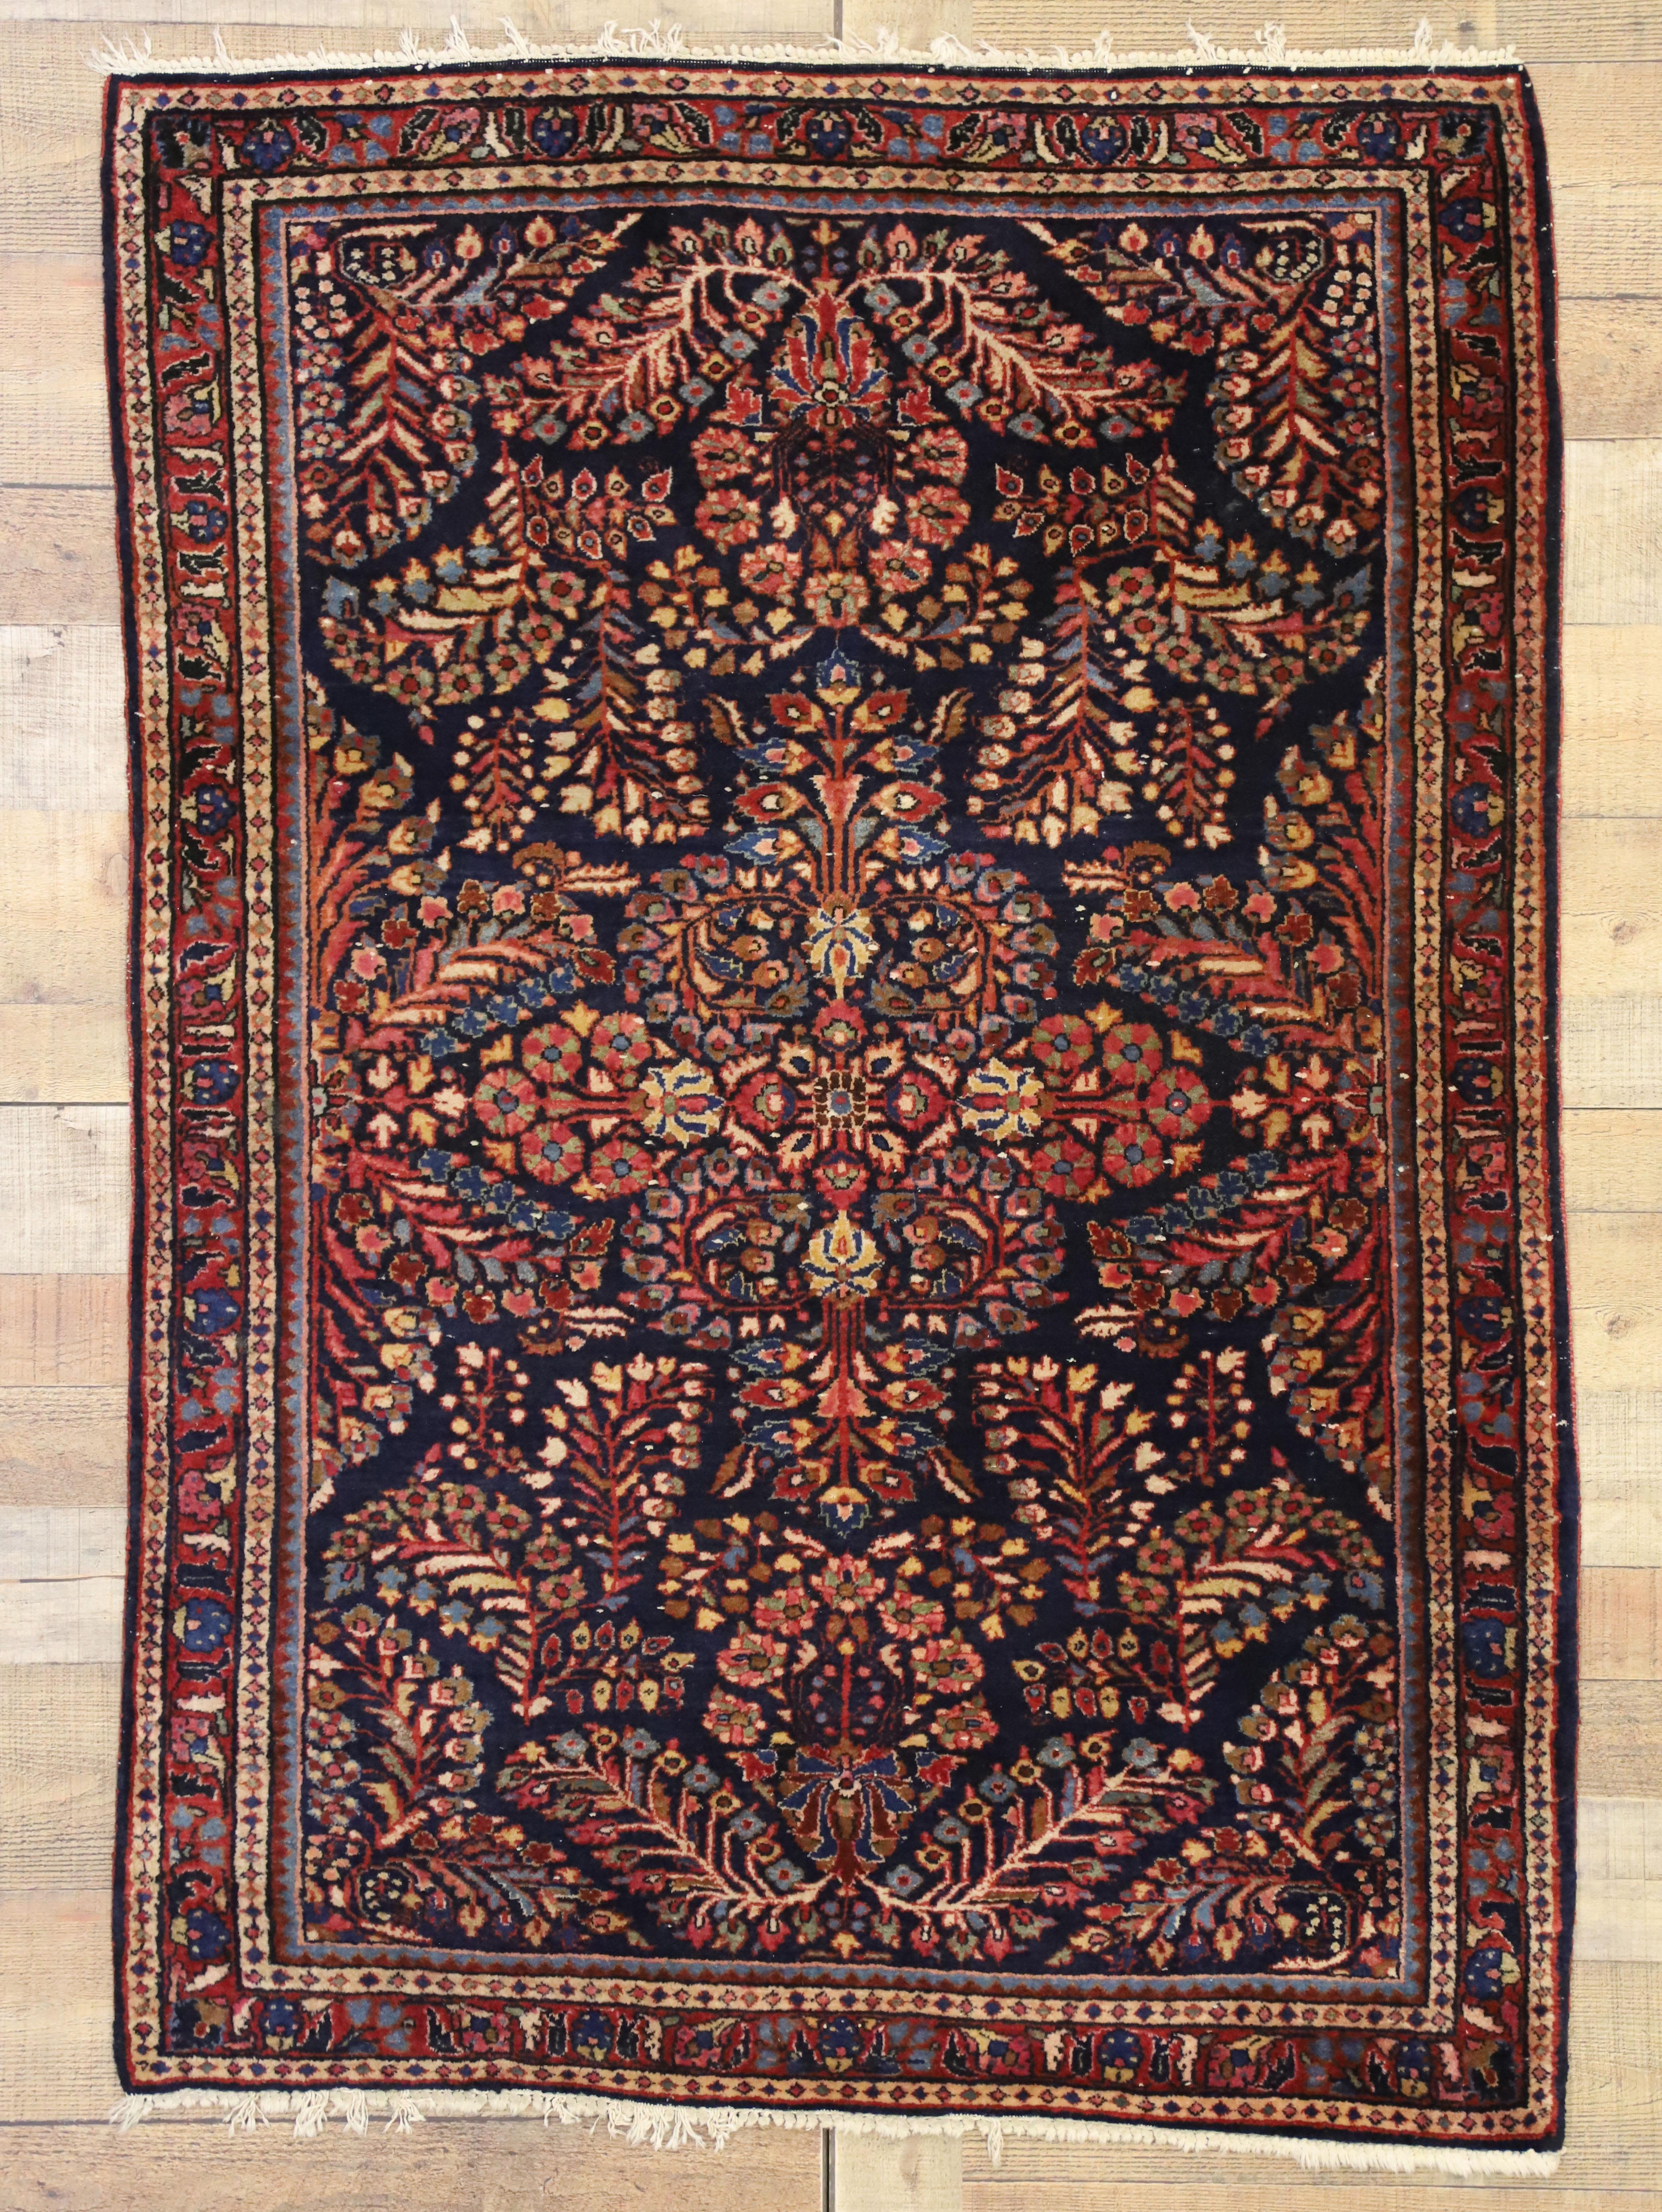 Antique Persian Sarouk Rug with Luxe Victorian Style, Scatter Rug 1